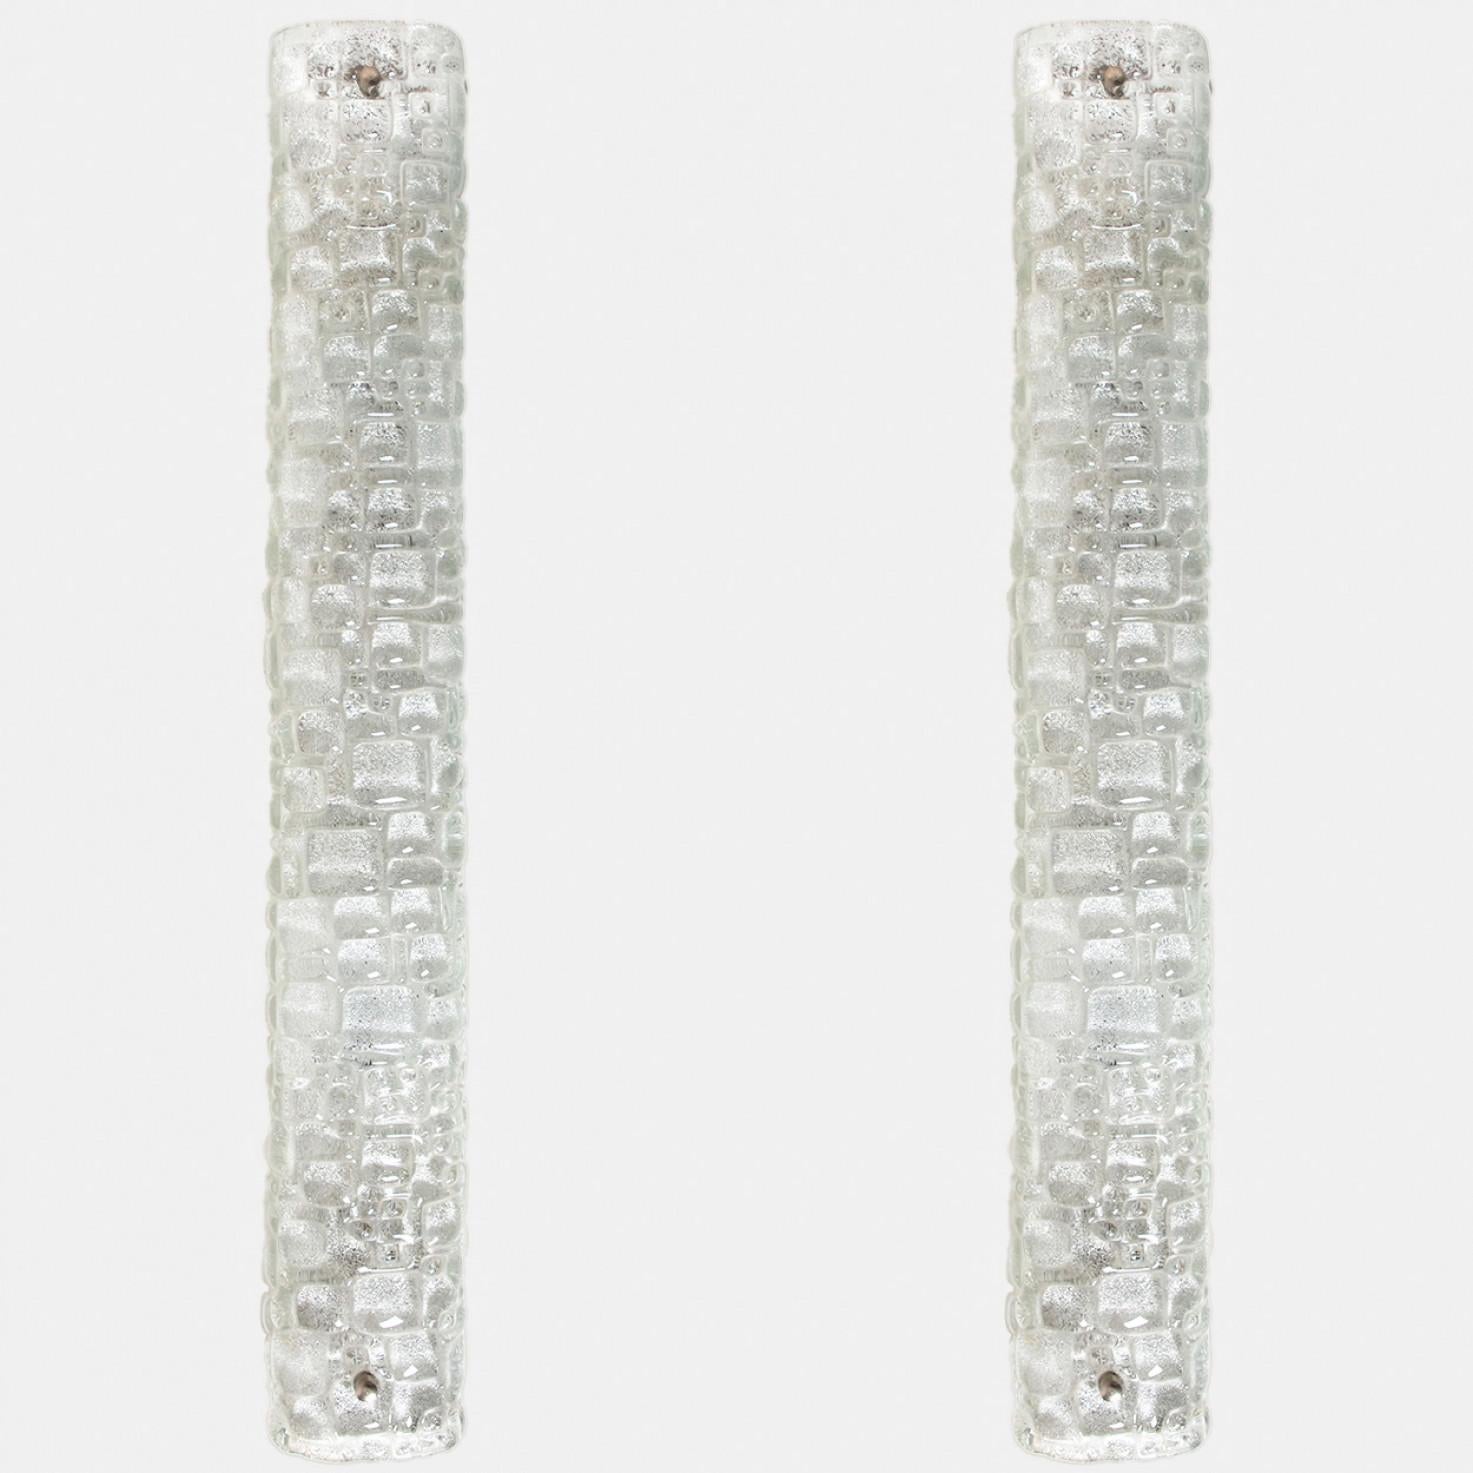 Pair of White Clear Bubbled Glass Wall Lights by Hillebrand, Germany, 1960s For Sale 4